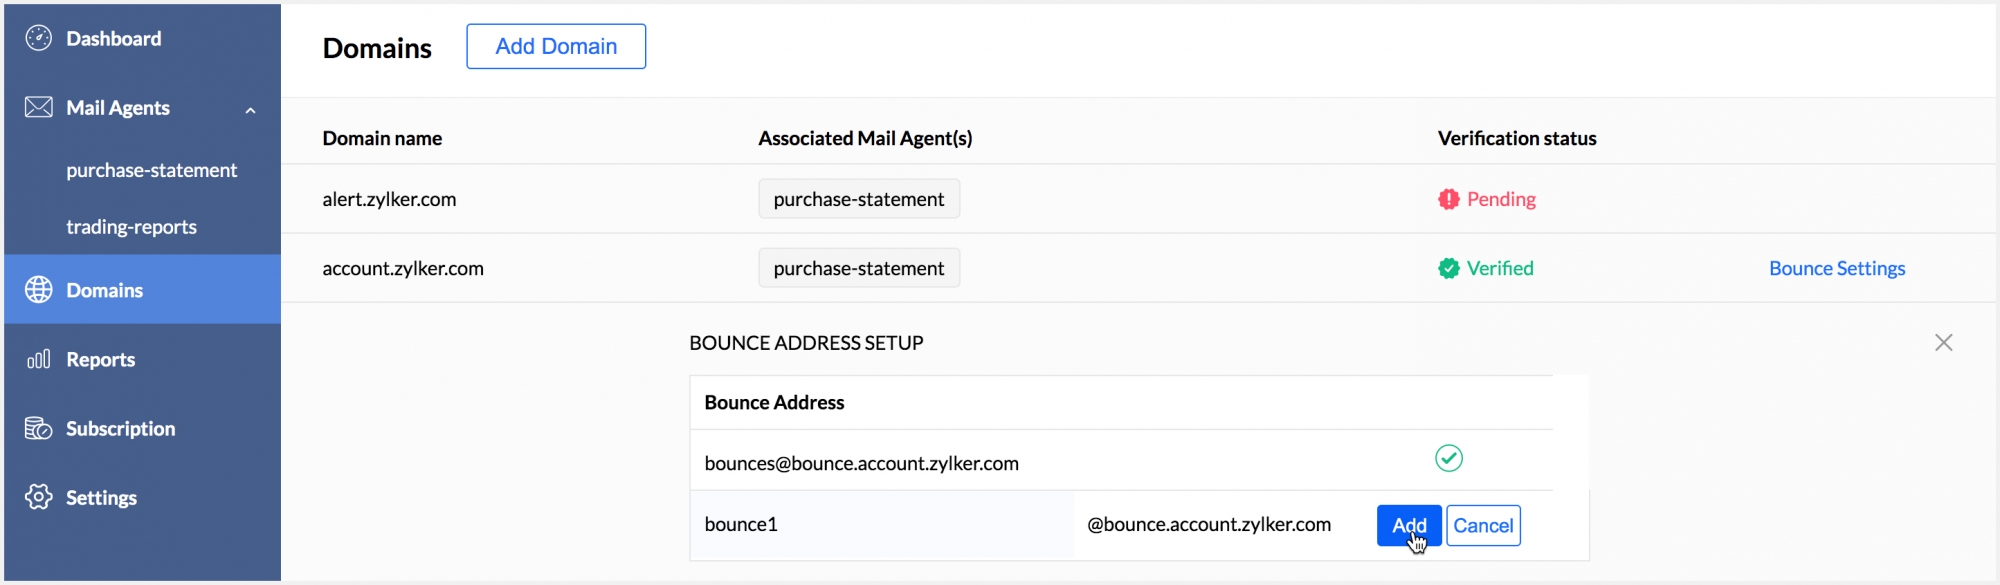 Create Bounce Address within the Domains tab